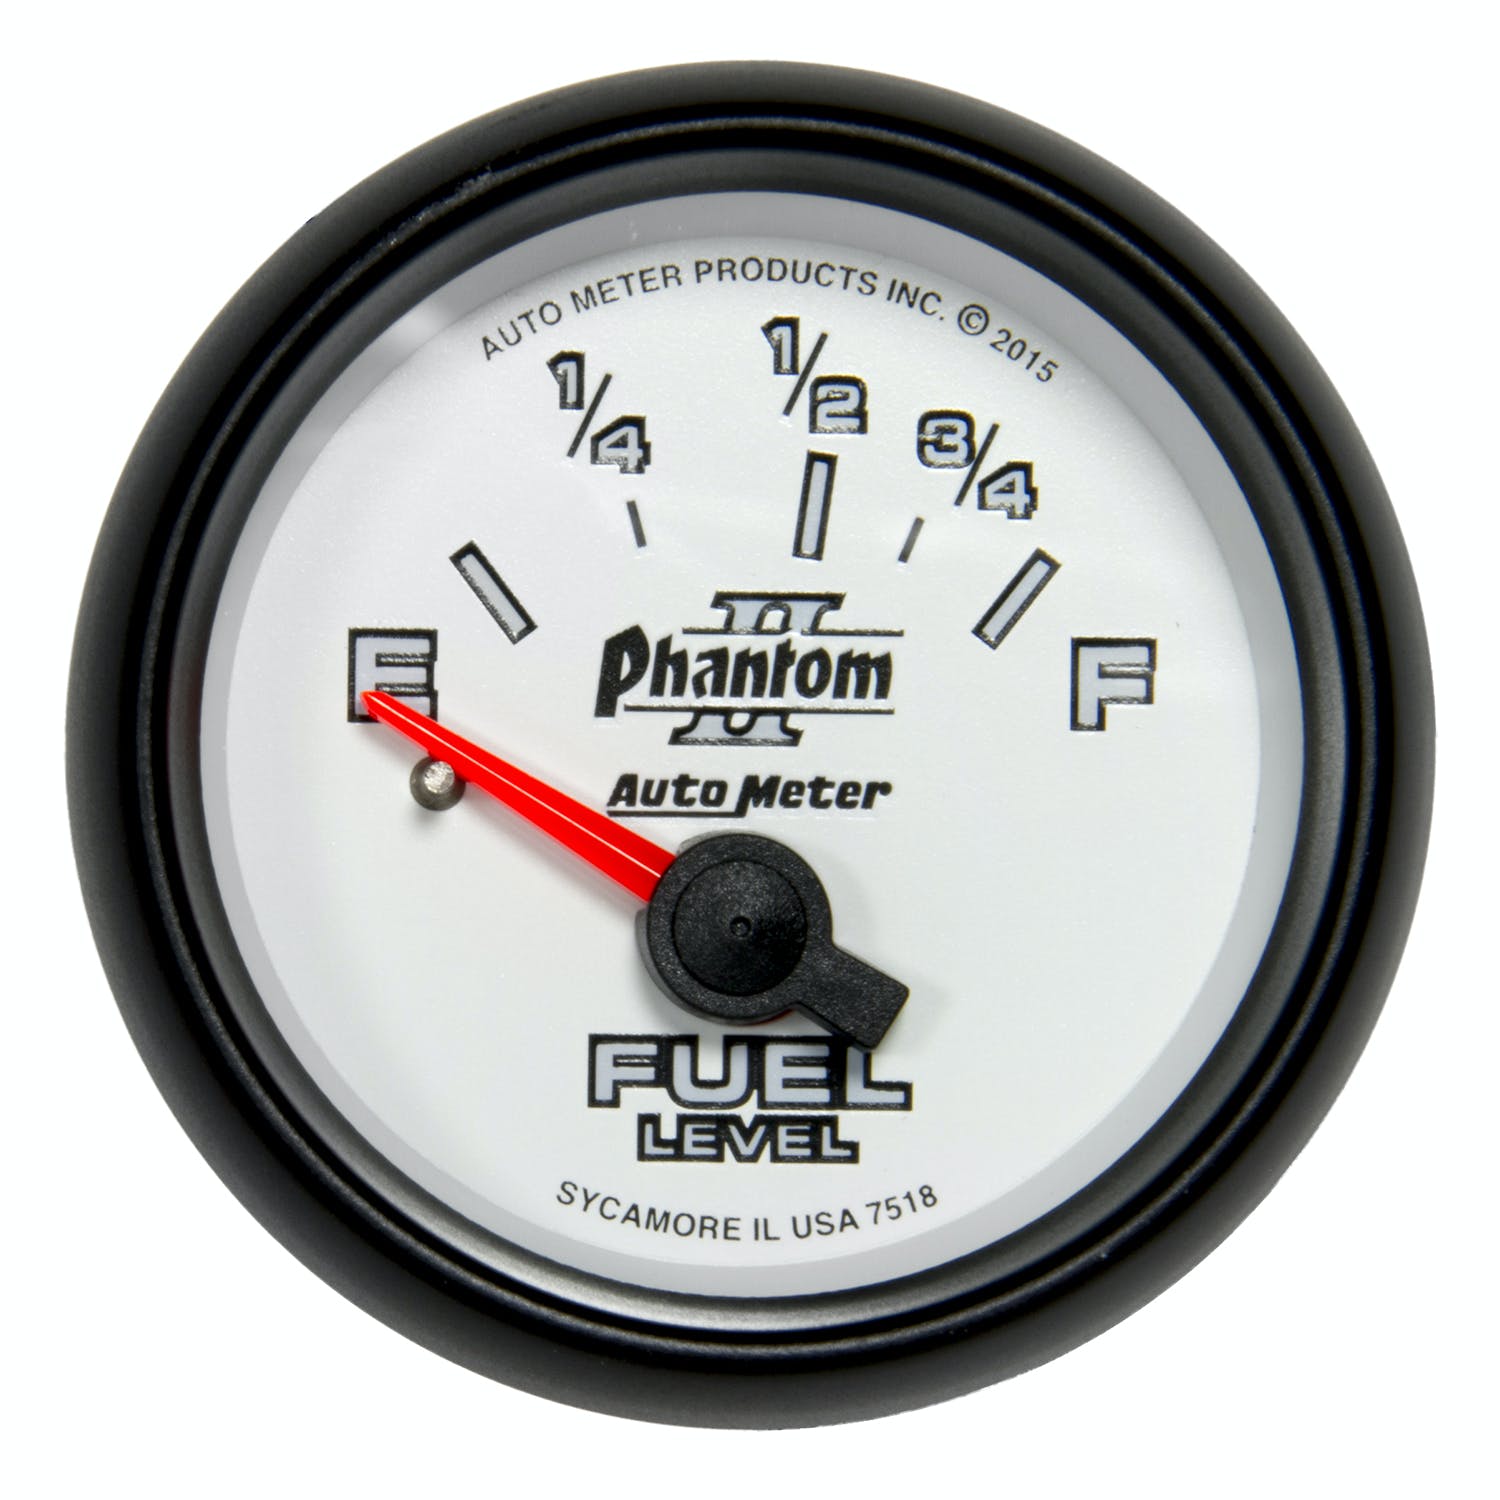 AutoMeter Products 7518 GAUGE; FUEL LEVEL; 2 1/16in.; 16OE TO 158OF; ELEC; PHANTOM II